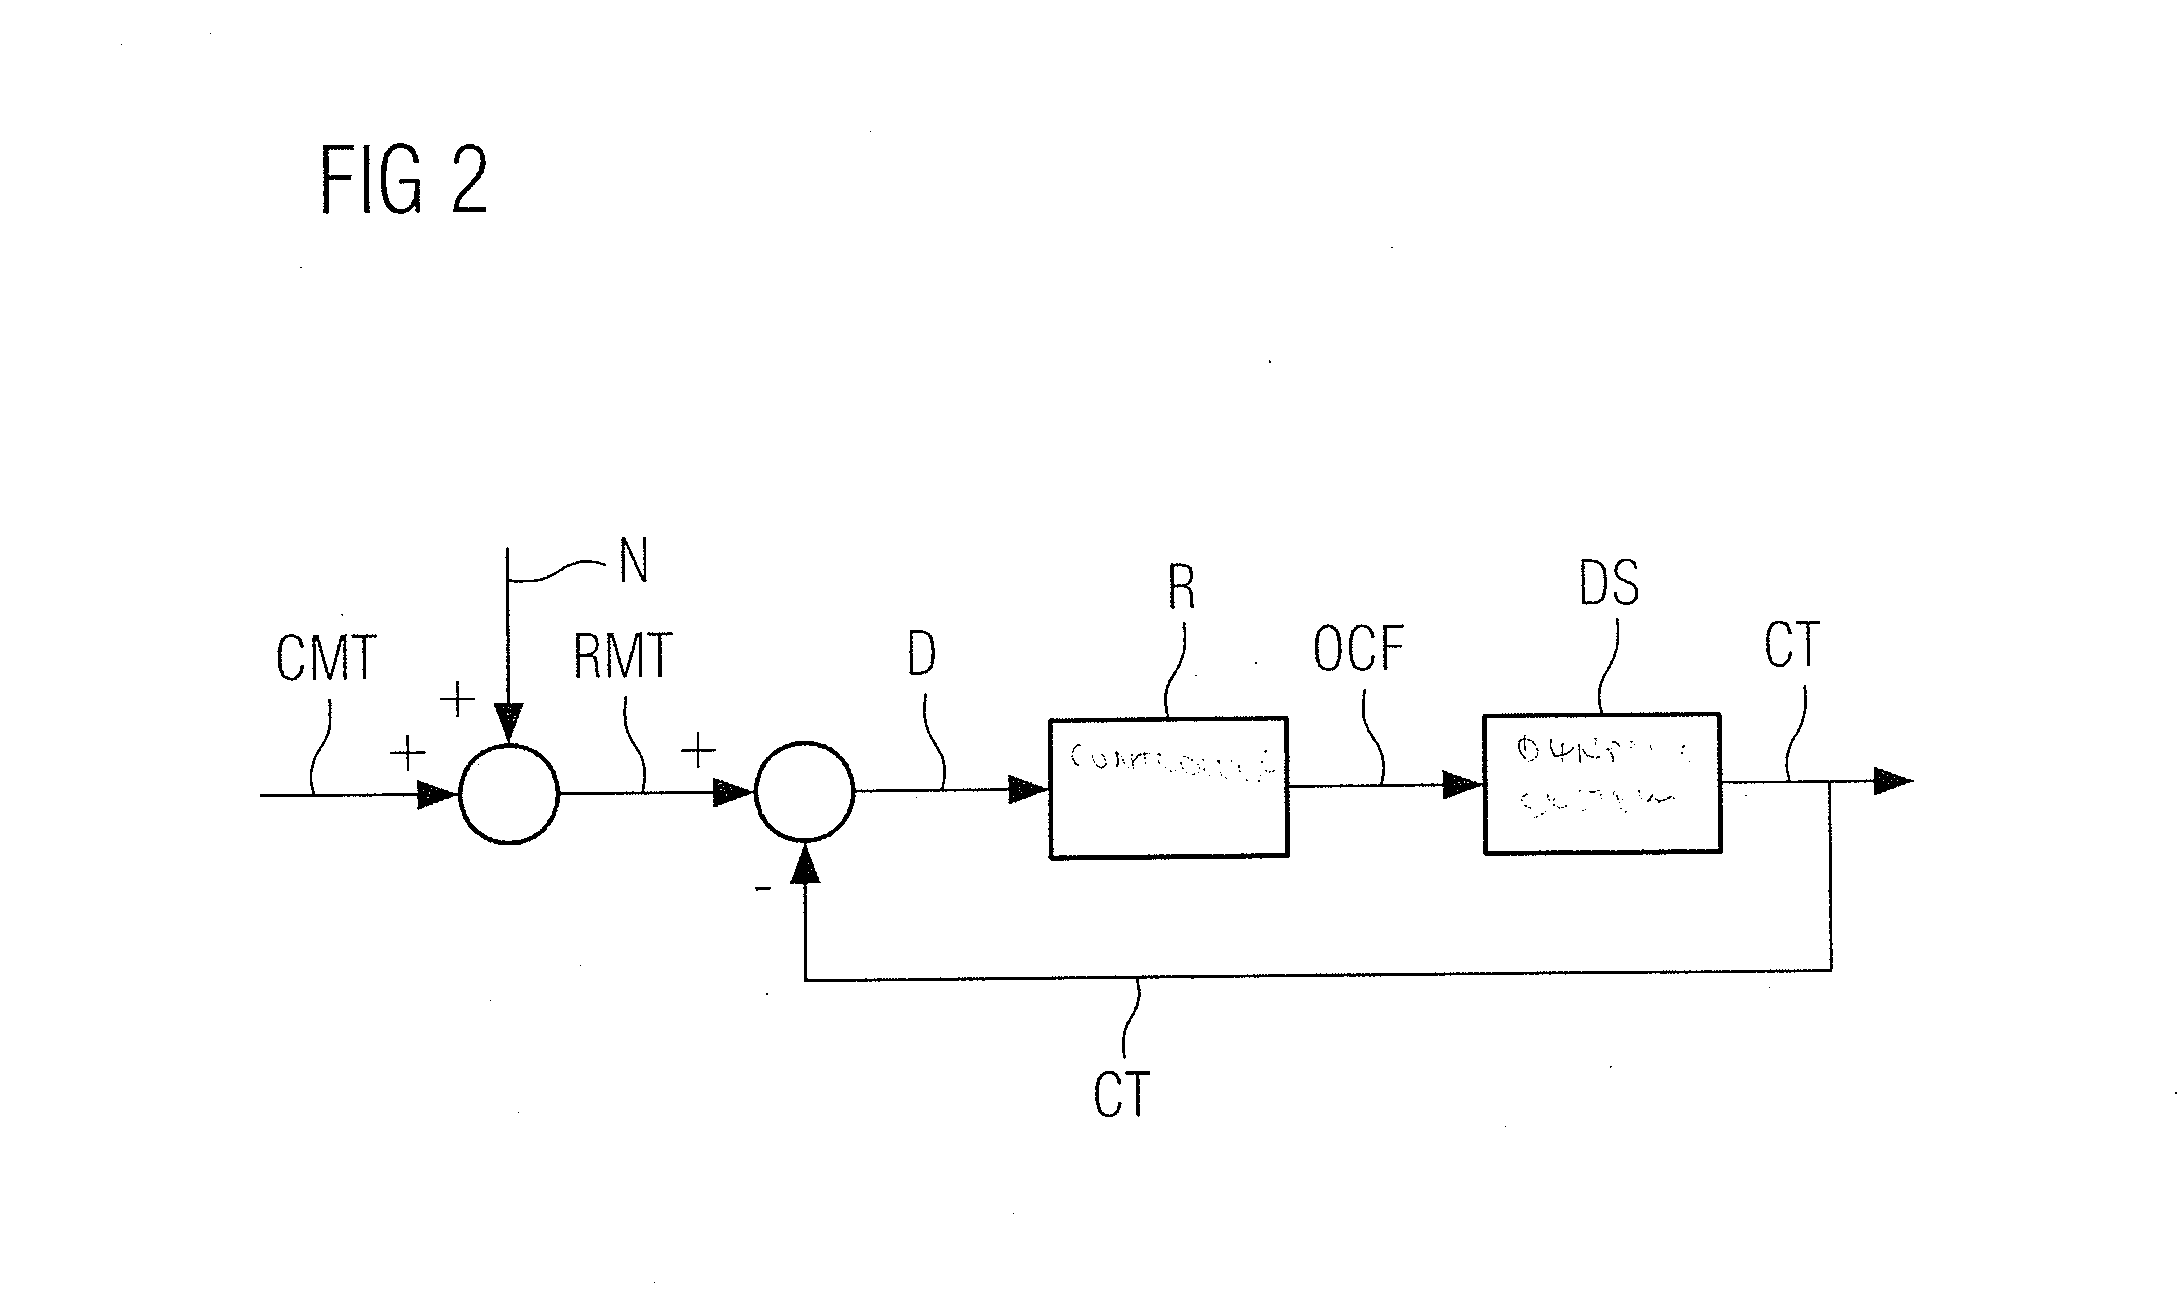 System and Method for Time Synchronization in a Communication Network